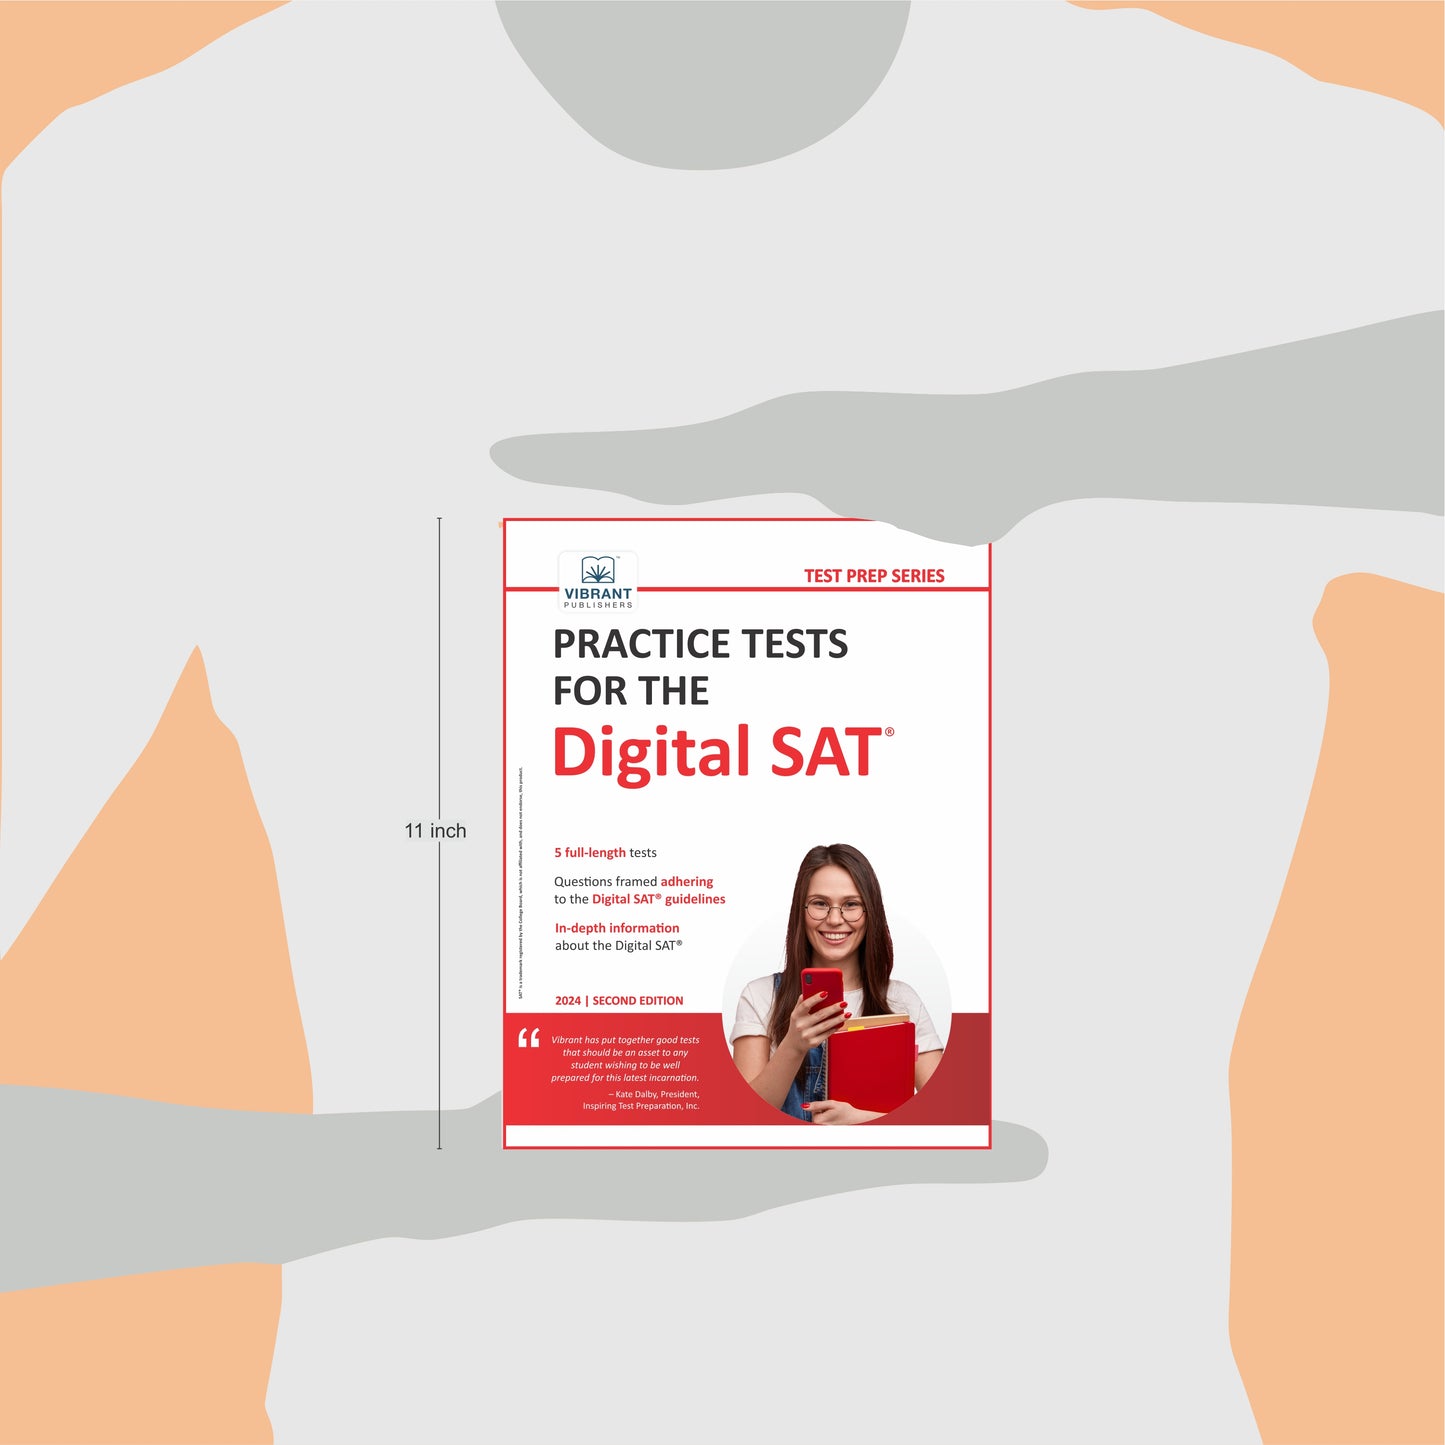 Practice Tests for the Digital SAT (2024 Edition)